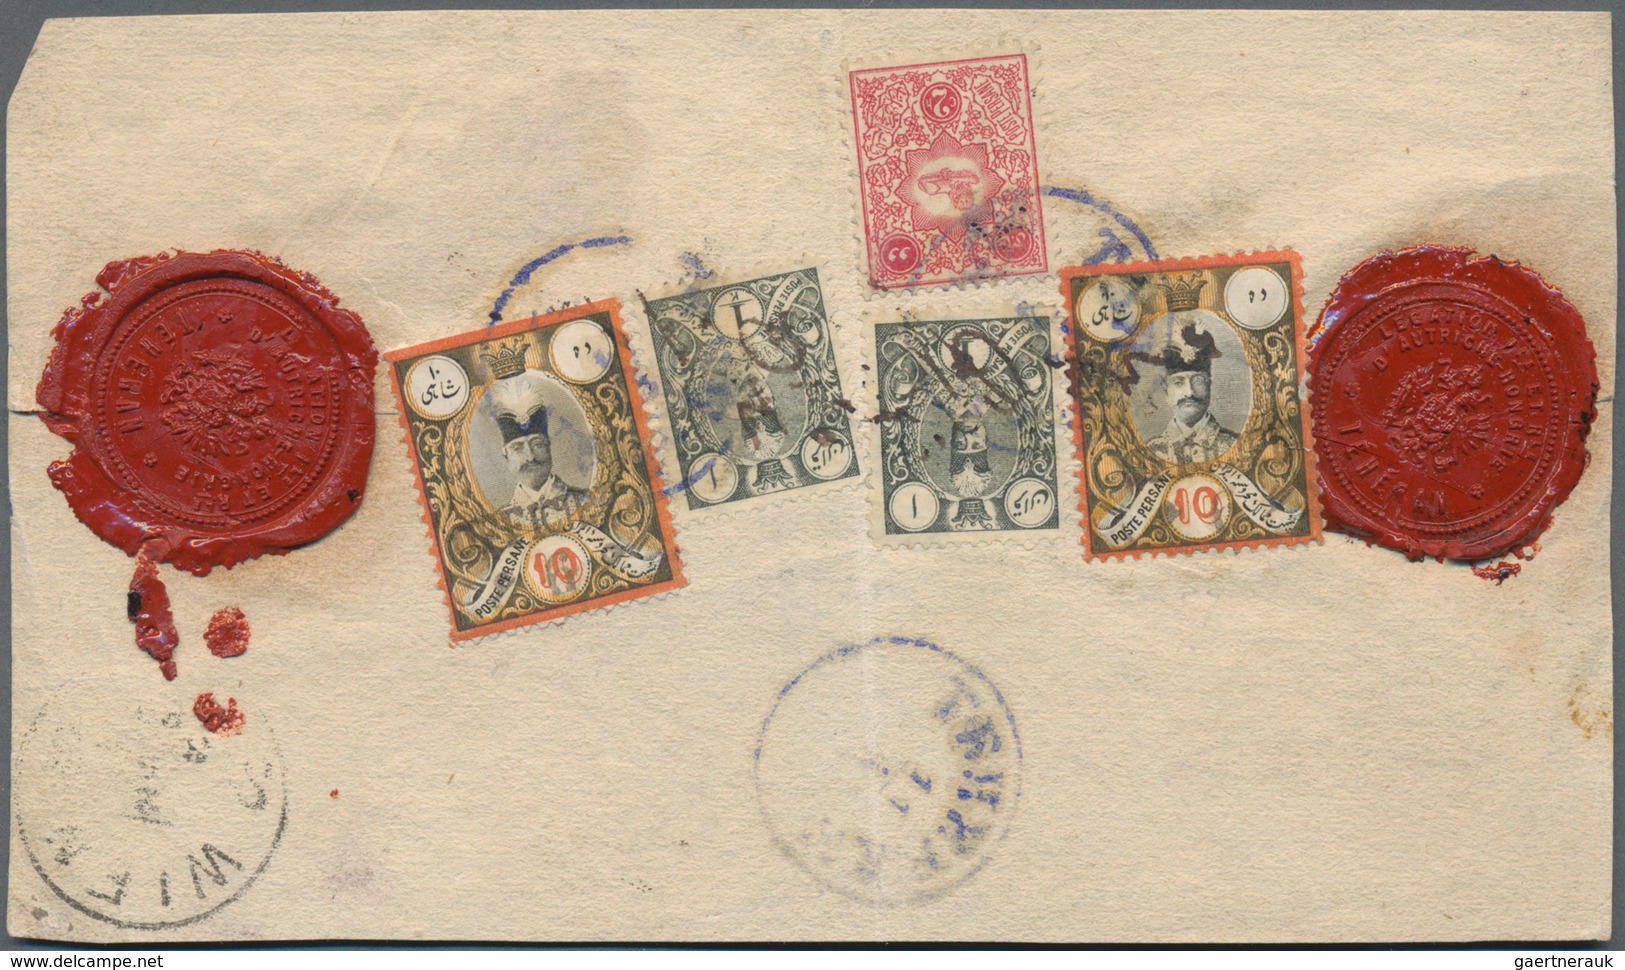 Iran: 1887, Letter Piece With Two Intact Seals Of The K.u.K. Monarchy Tehran (11.4.), Vienna (2.5.). - Iran